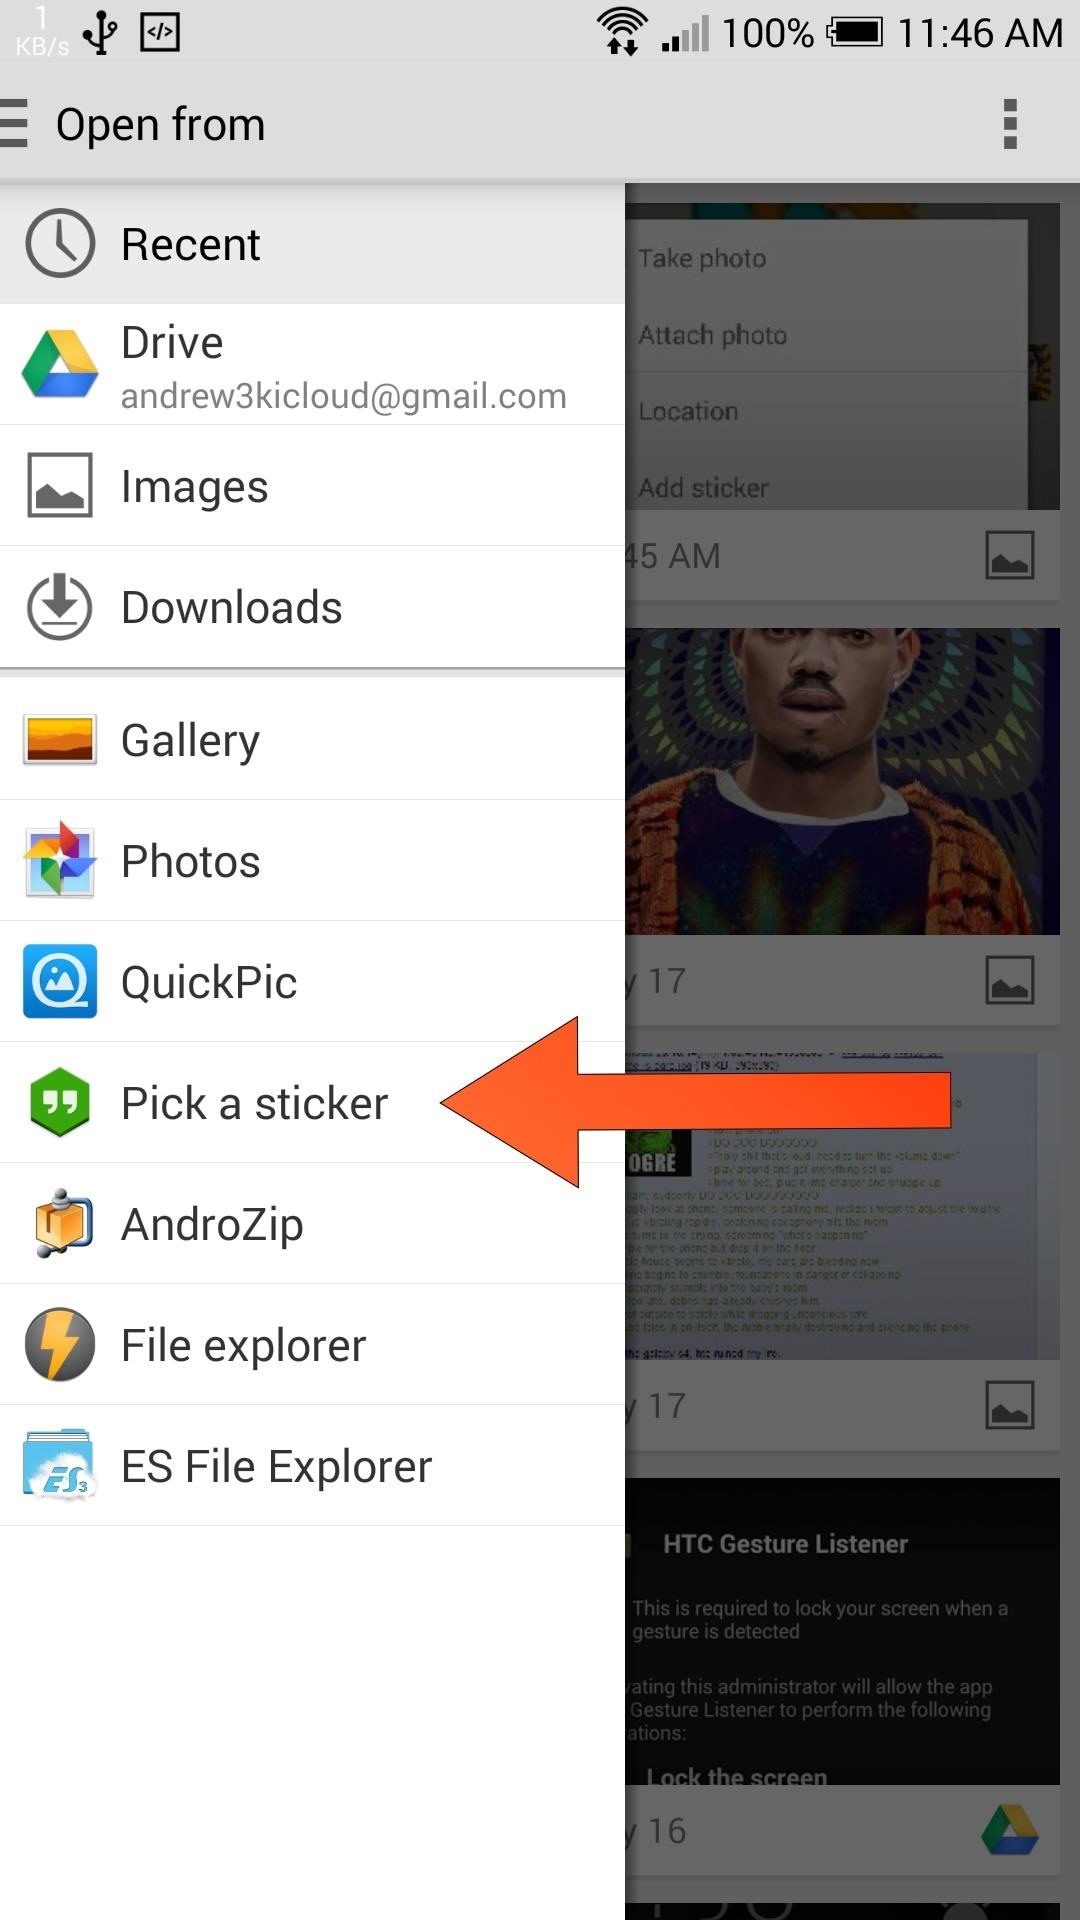 How to Get iOS-Exclusive Google Hangout Stickers on Your HTC One